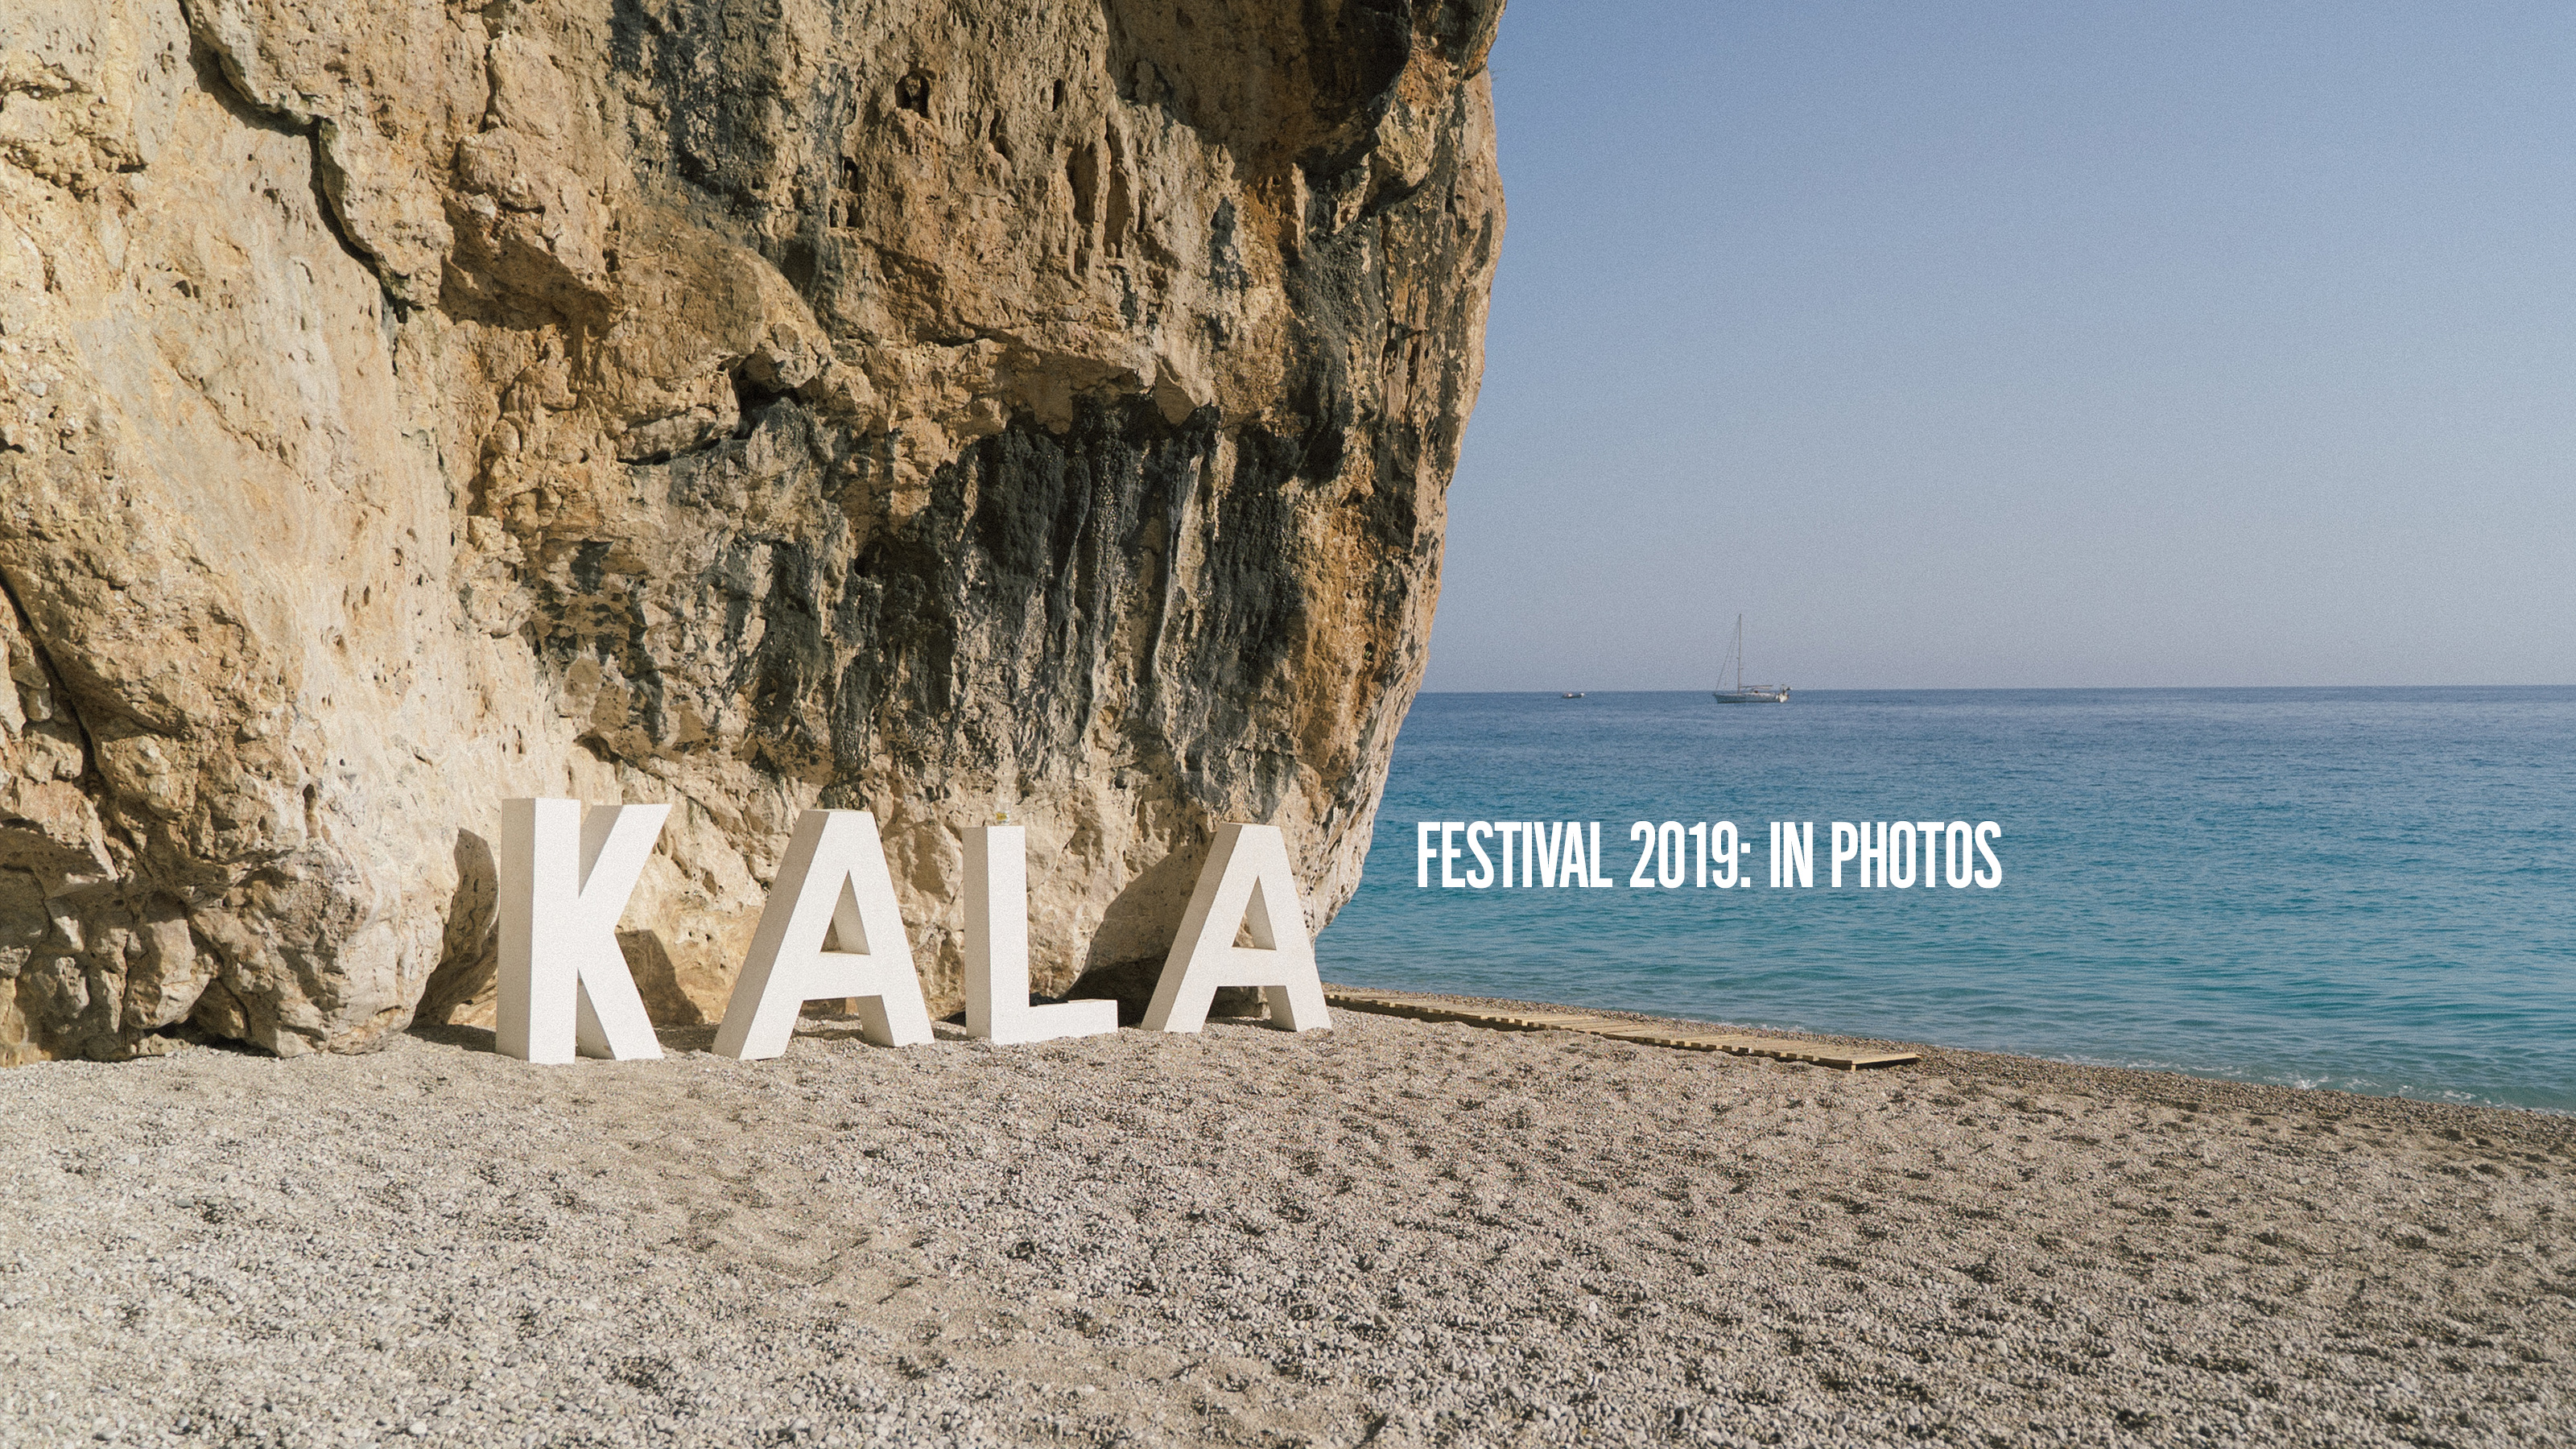 Kala Festival 2019 in pictures